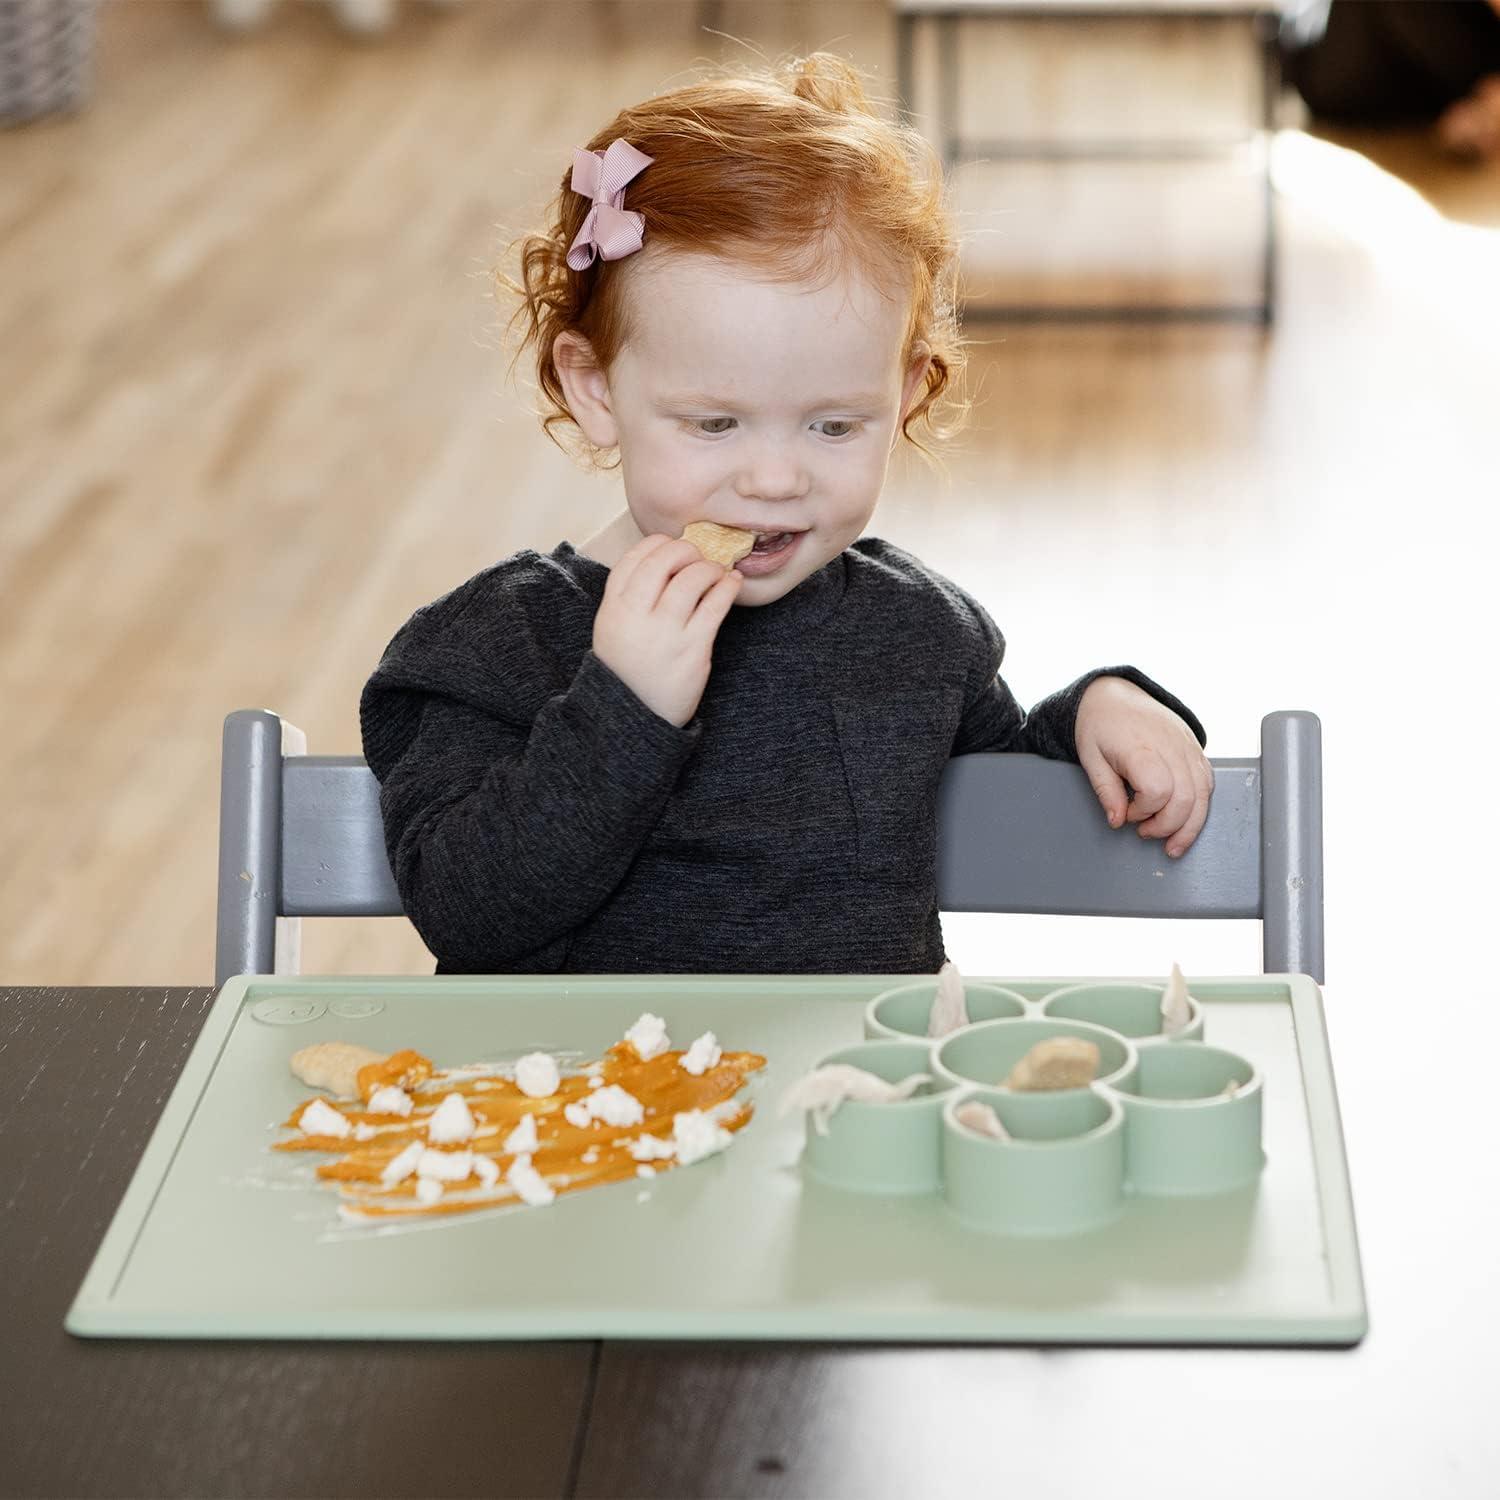 Ezpz First Foods Set (Sage) - 100% Silicone Mealtime Set - Includes